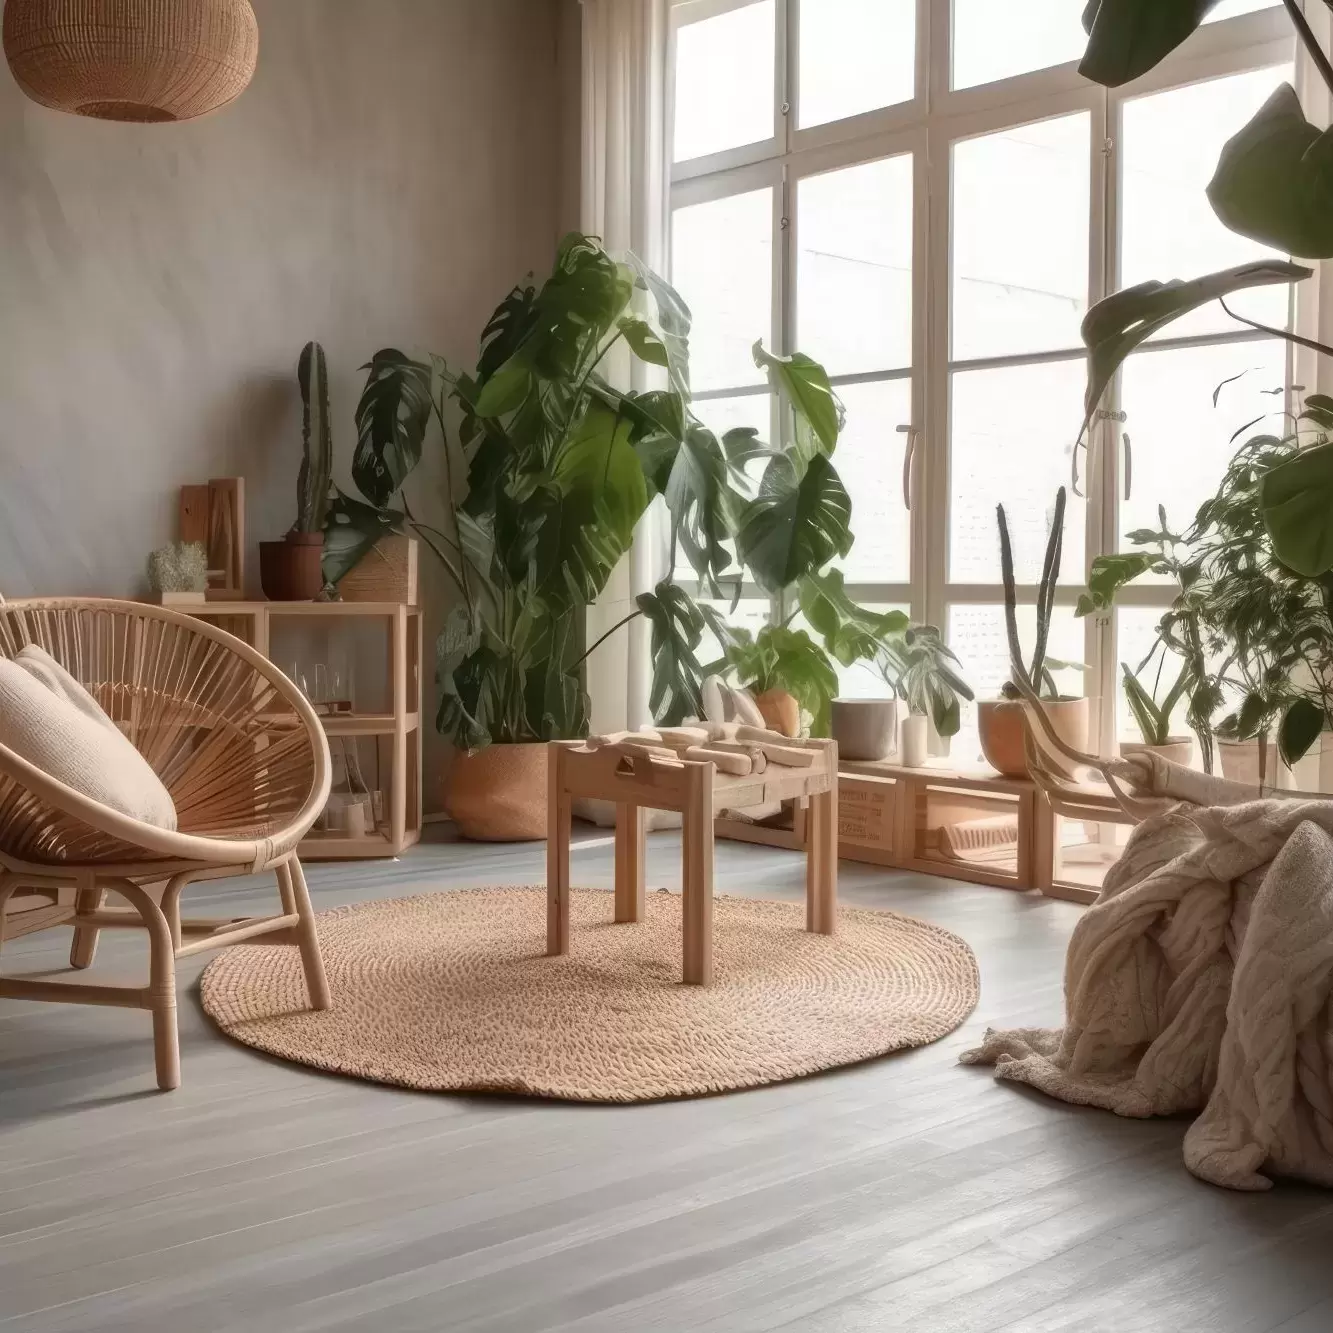 An apartment where furniture is cohesive to 2023's interior design trends and many plants.